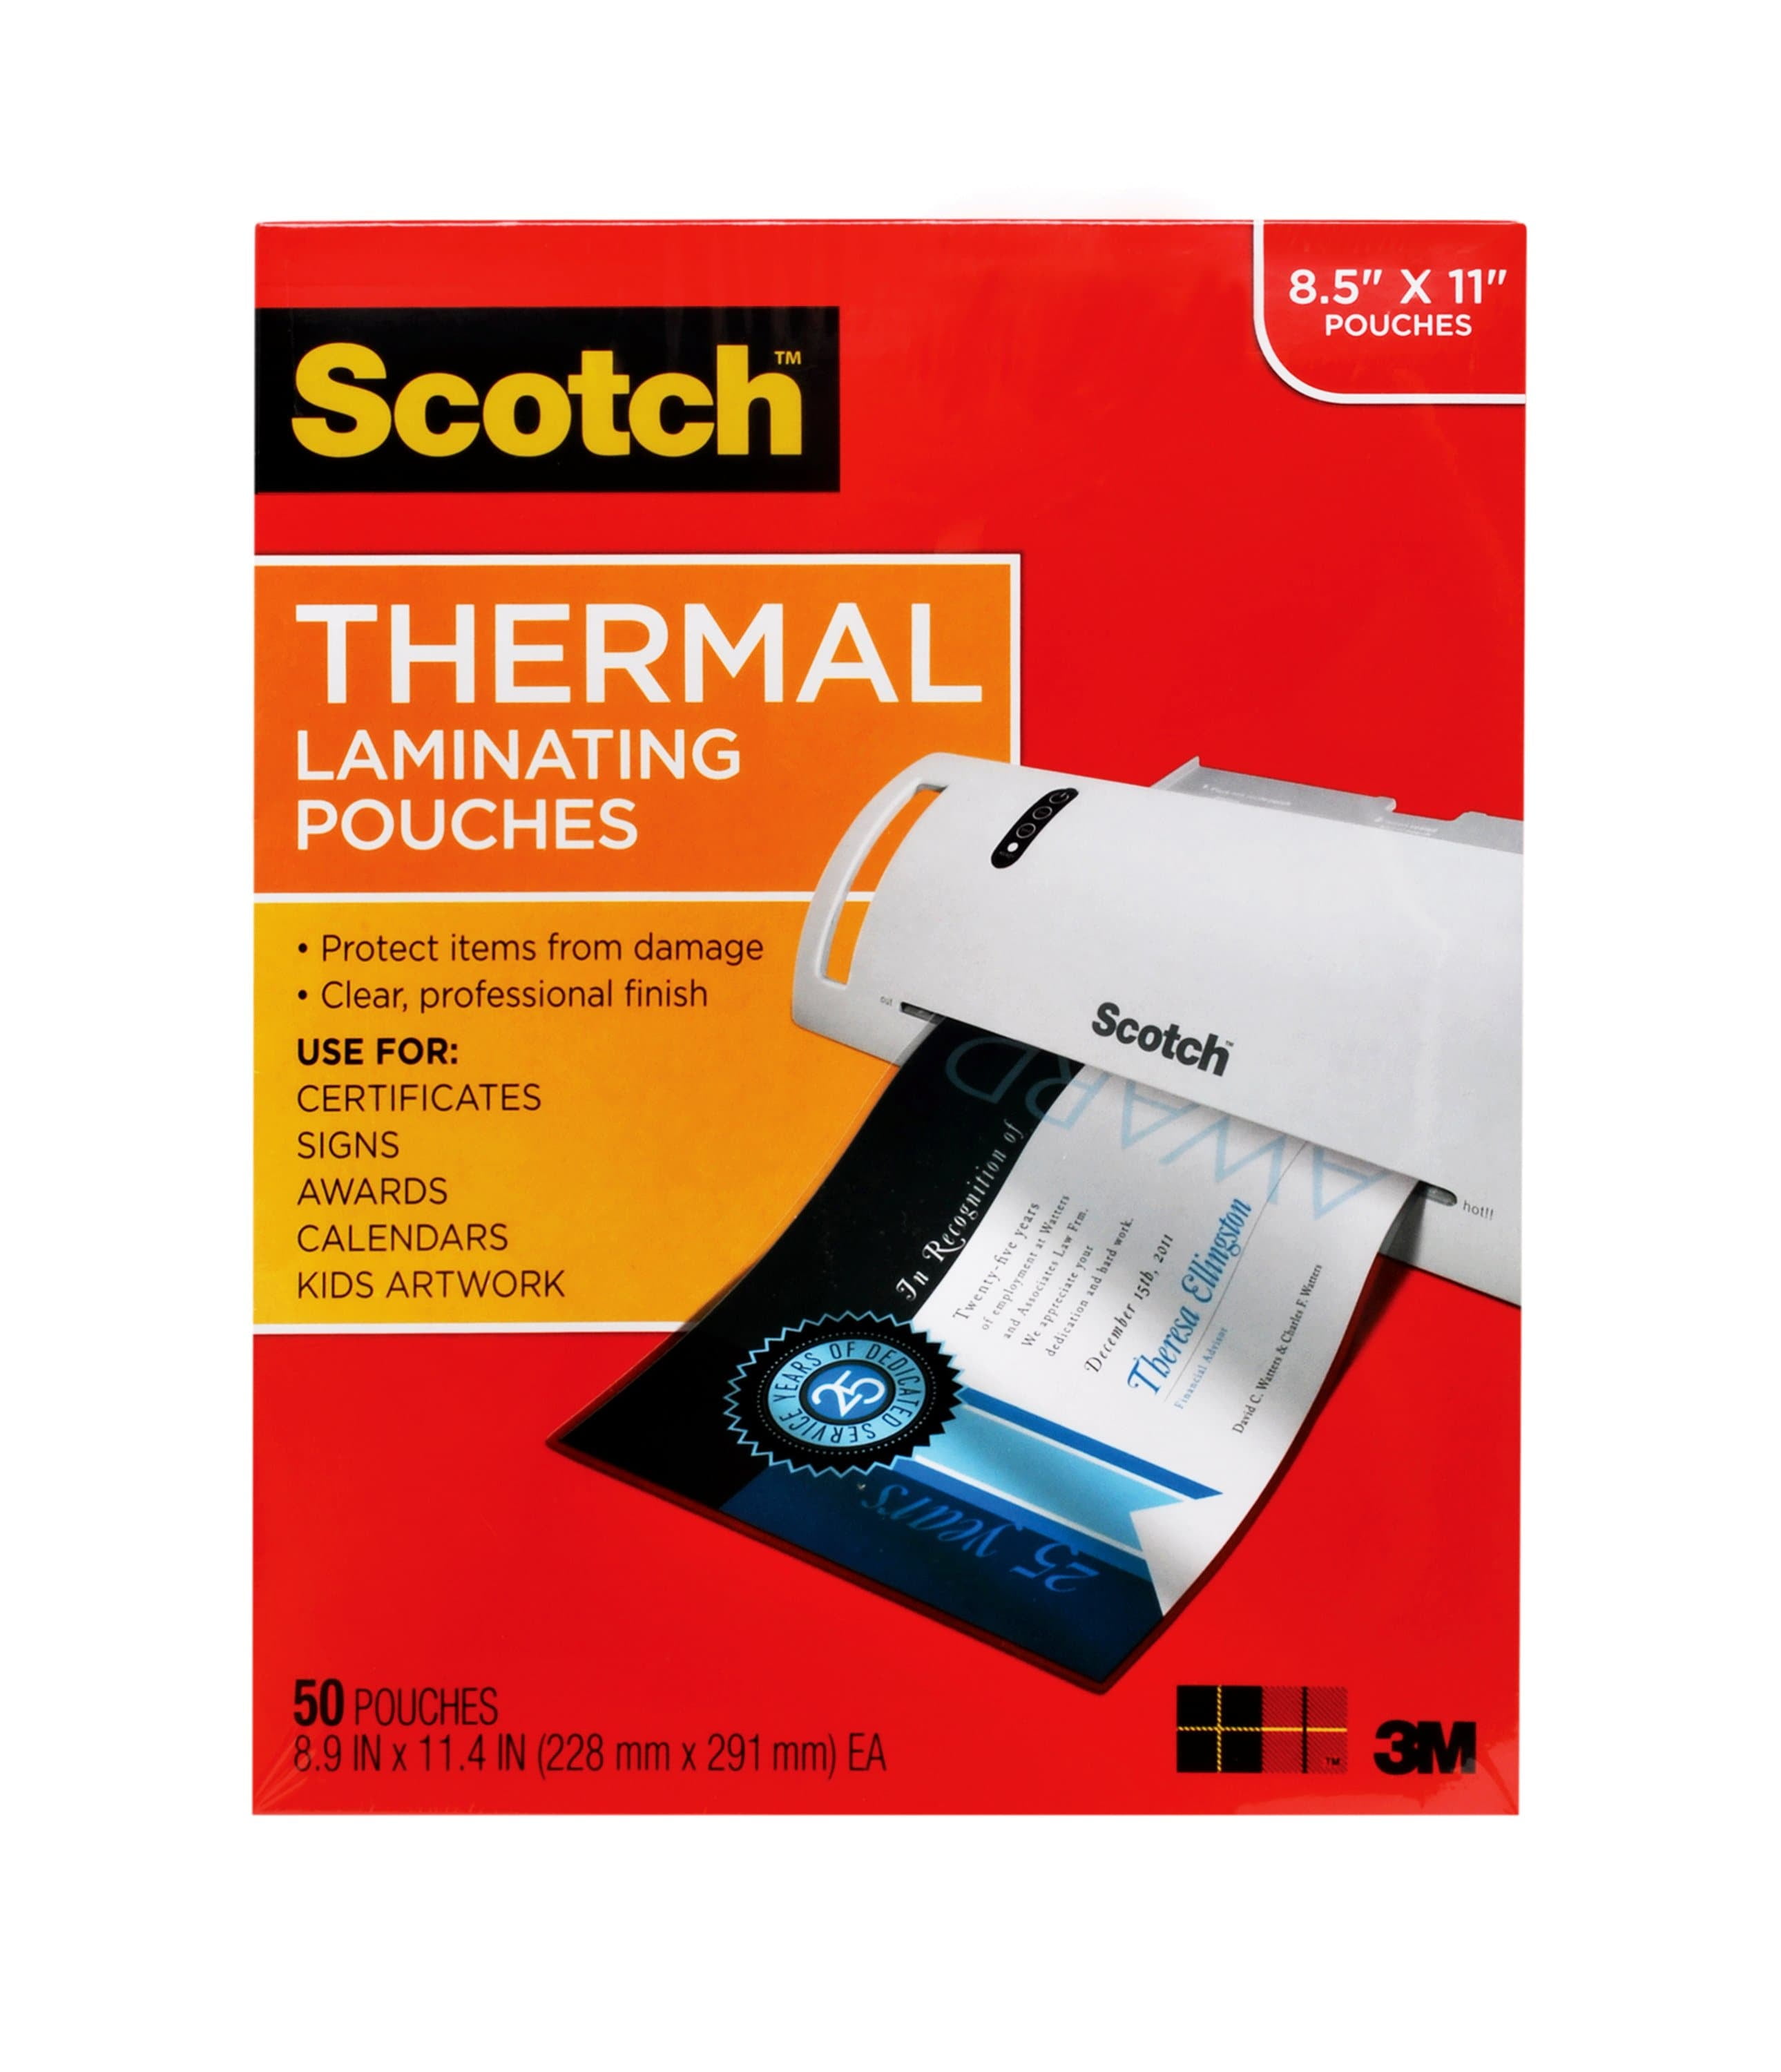 Scotch Thermal laminating pouches 